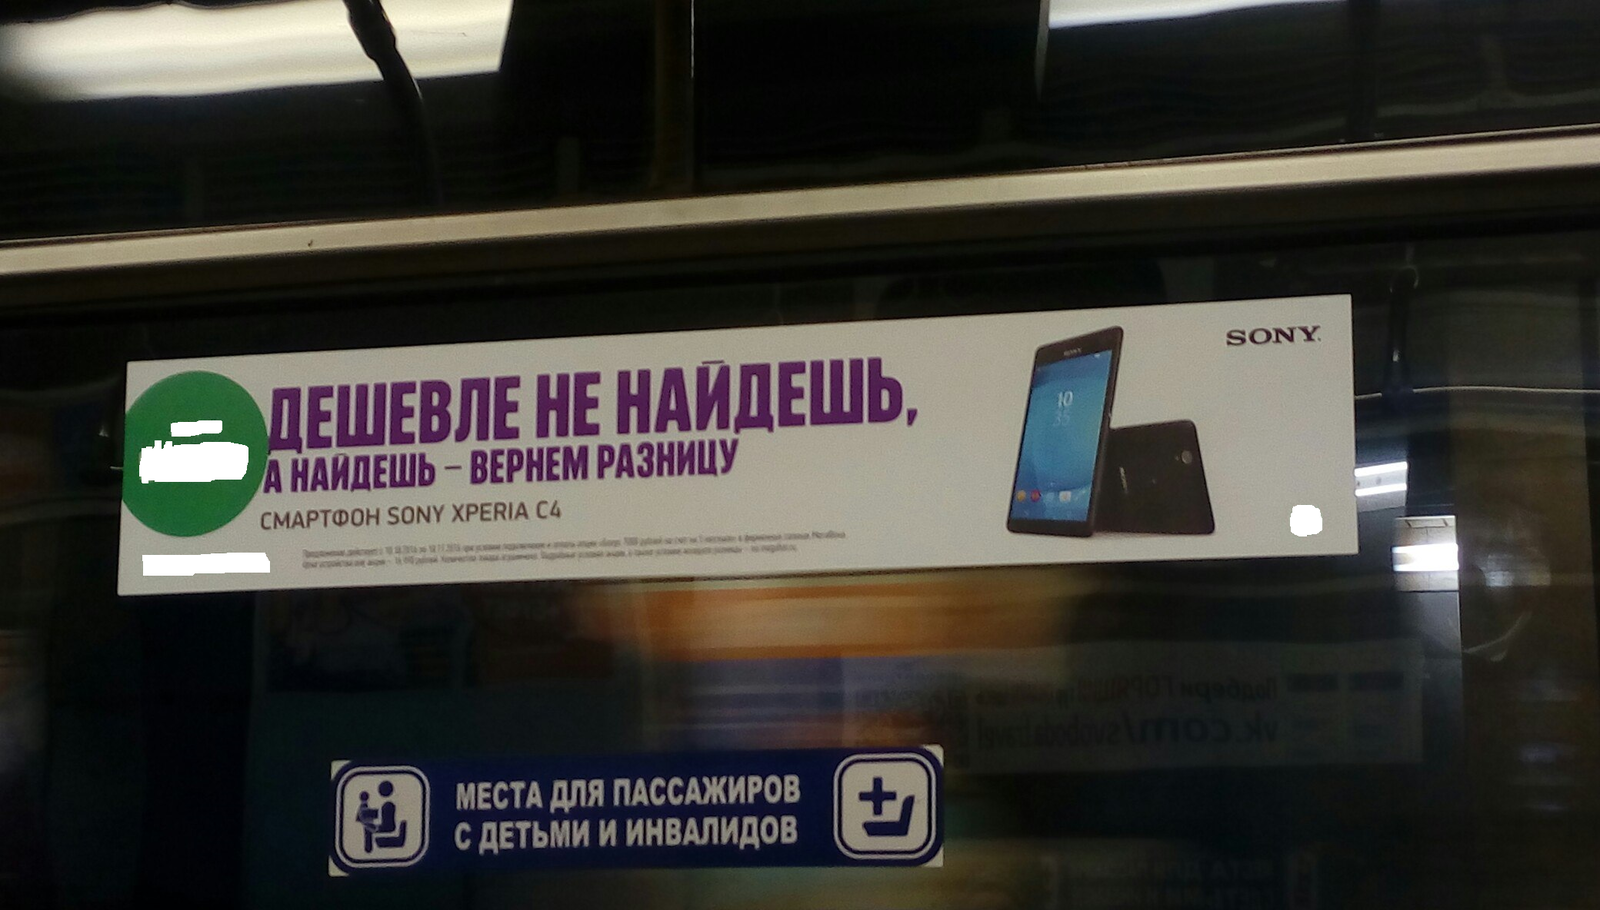 In light of recent gadget explosions, I wouldn't trust a tablet with that name. - C4, Metro, Гаджеты, Images